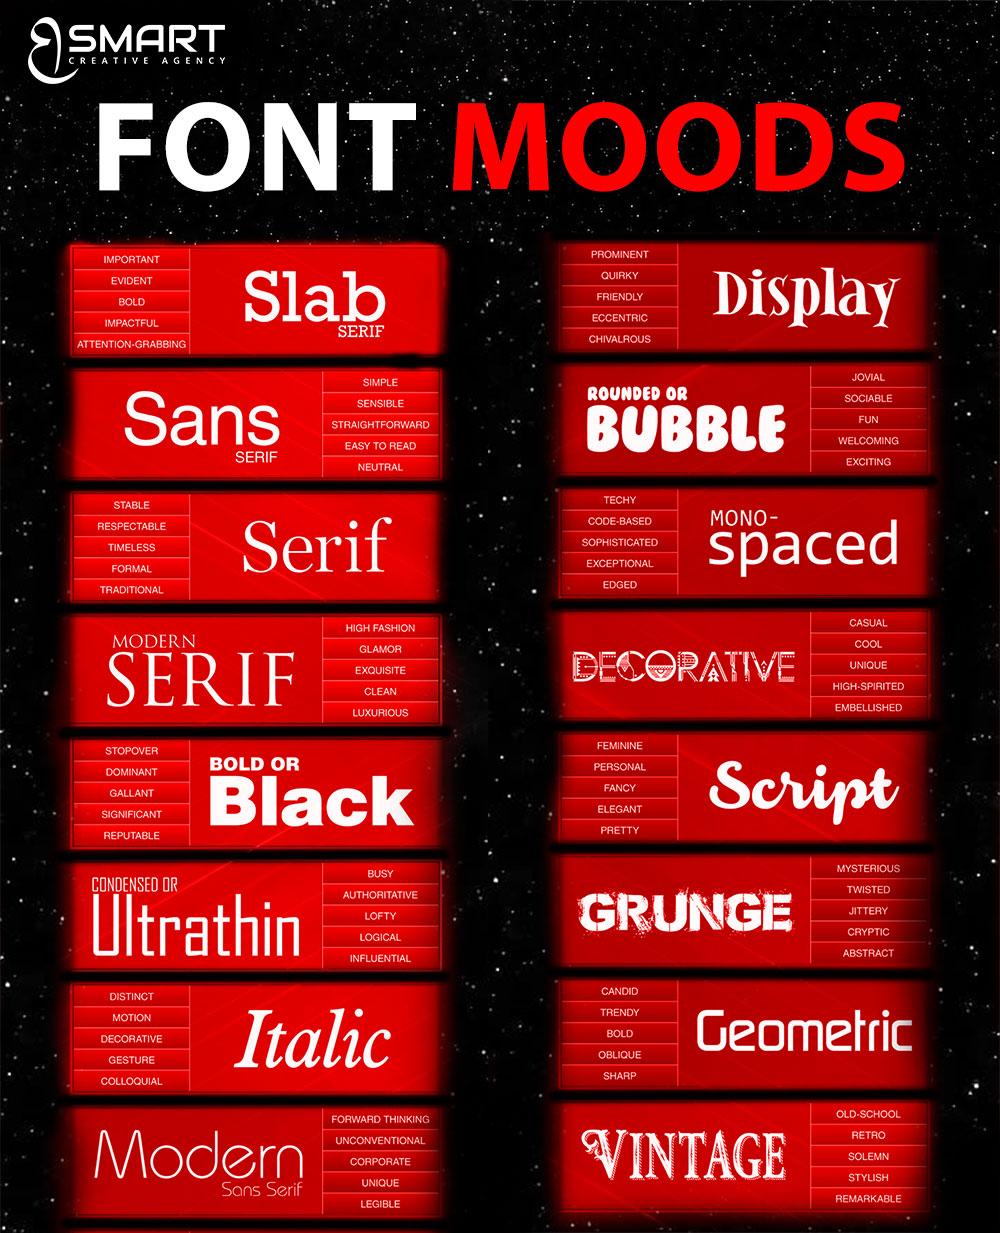 Understand the personality traits of each font category